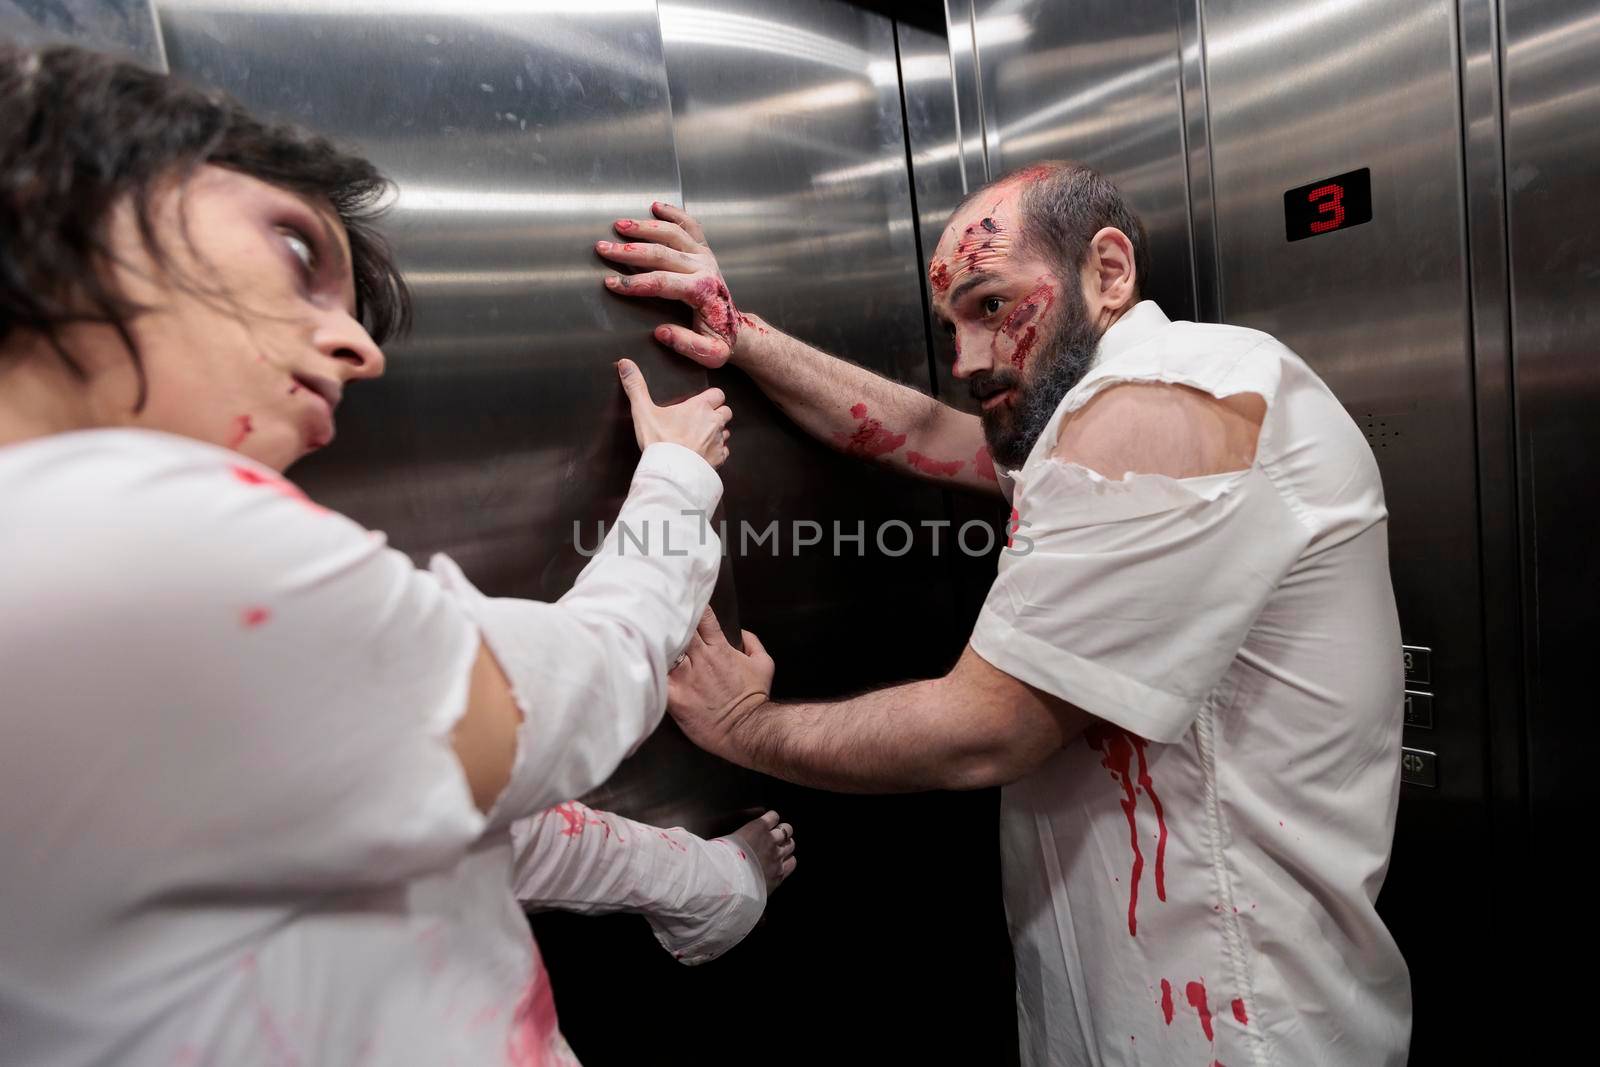 Aggressive evil zombies trying to escape elevator, brain eating evil monsters attacking workplace. Creepy spooky undead walkers with bloody dirty wounds, looking scary and gory terrifying.